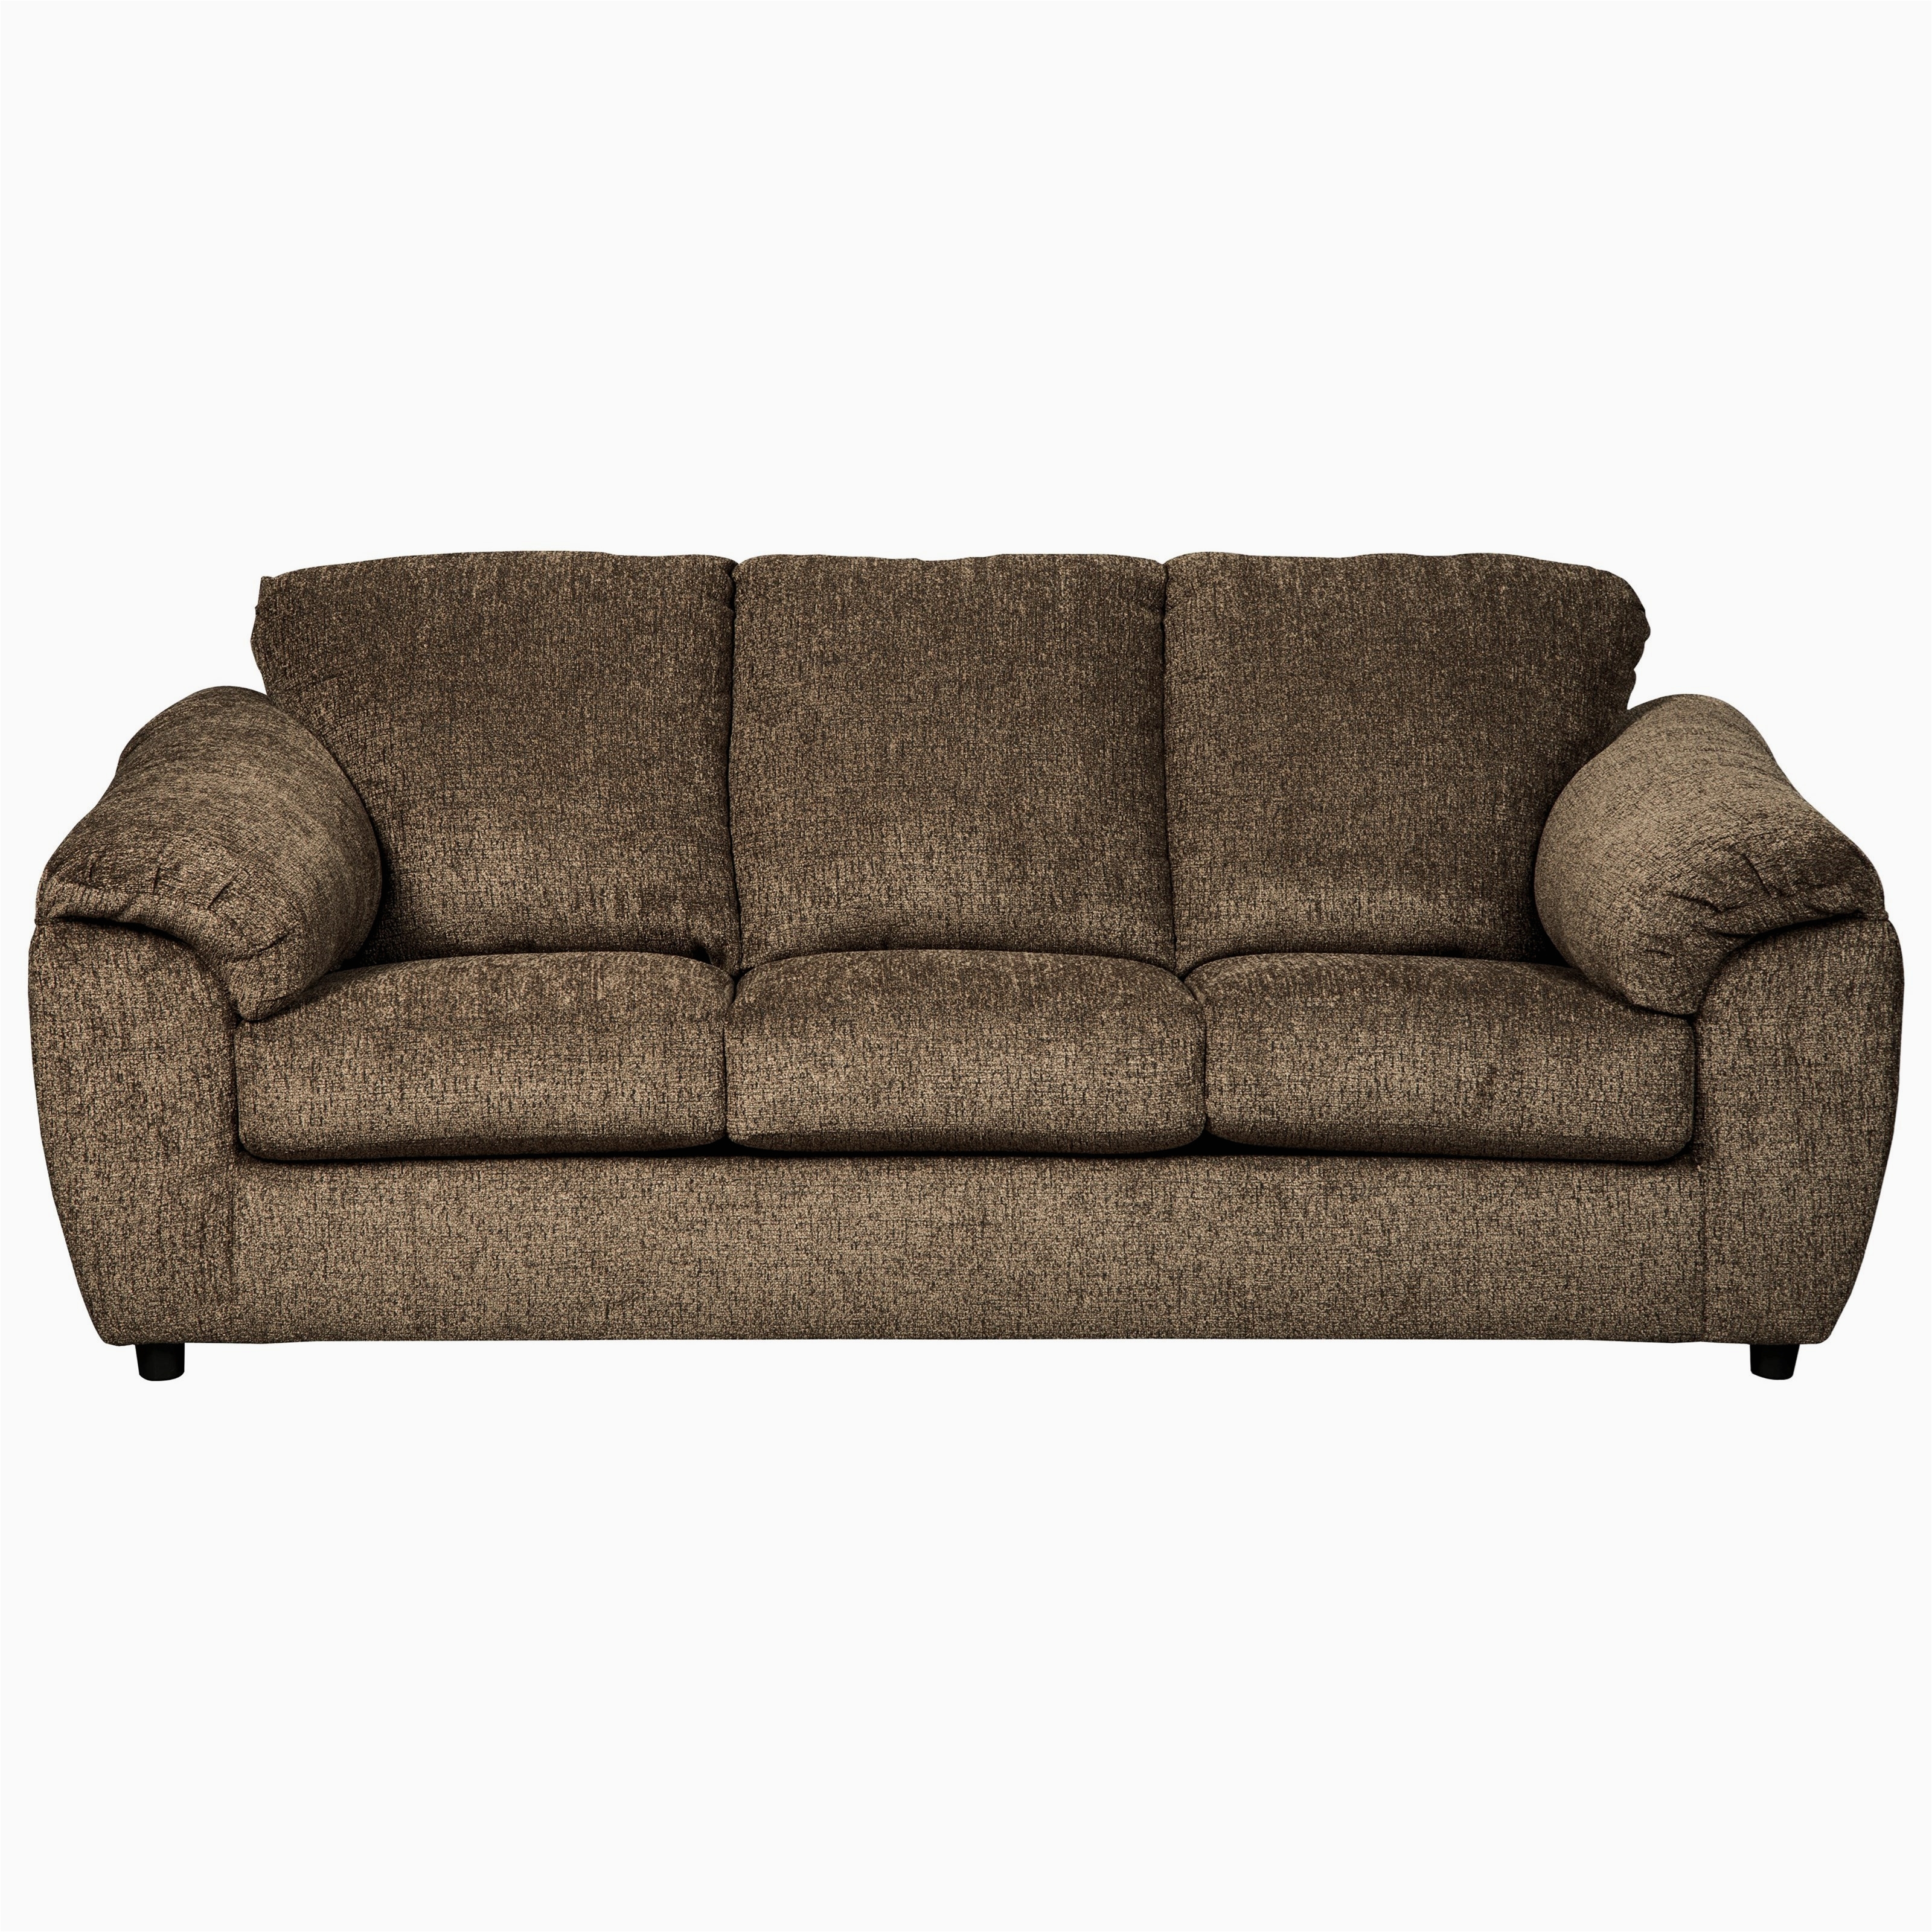 ashley furniture brown couch fresh signature design by ashley azaline casual contemporary sofa photograph of ashley